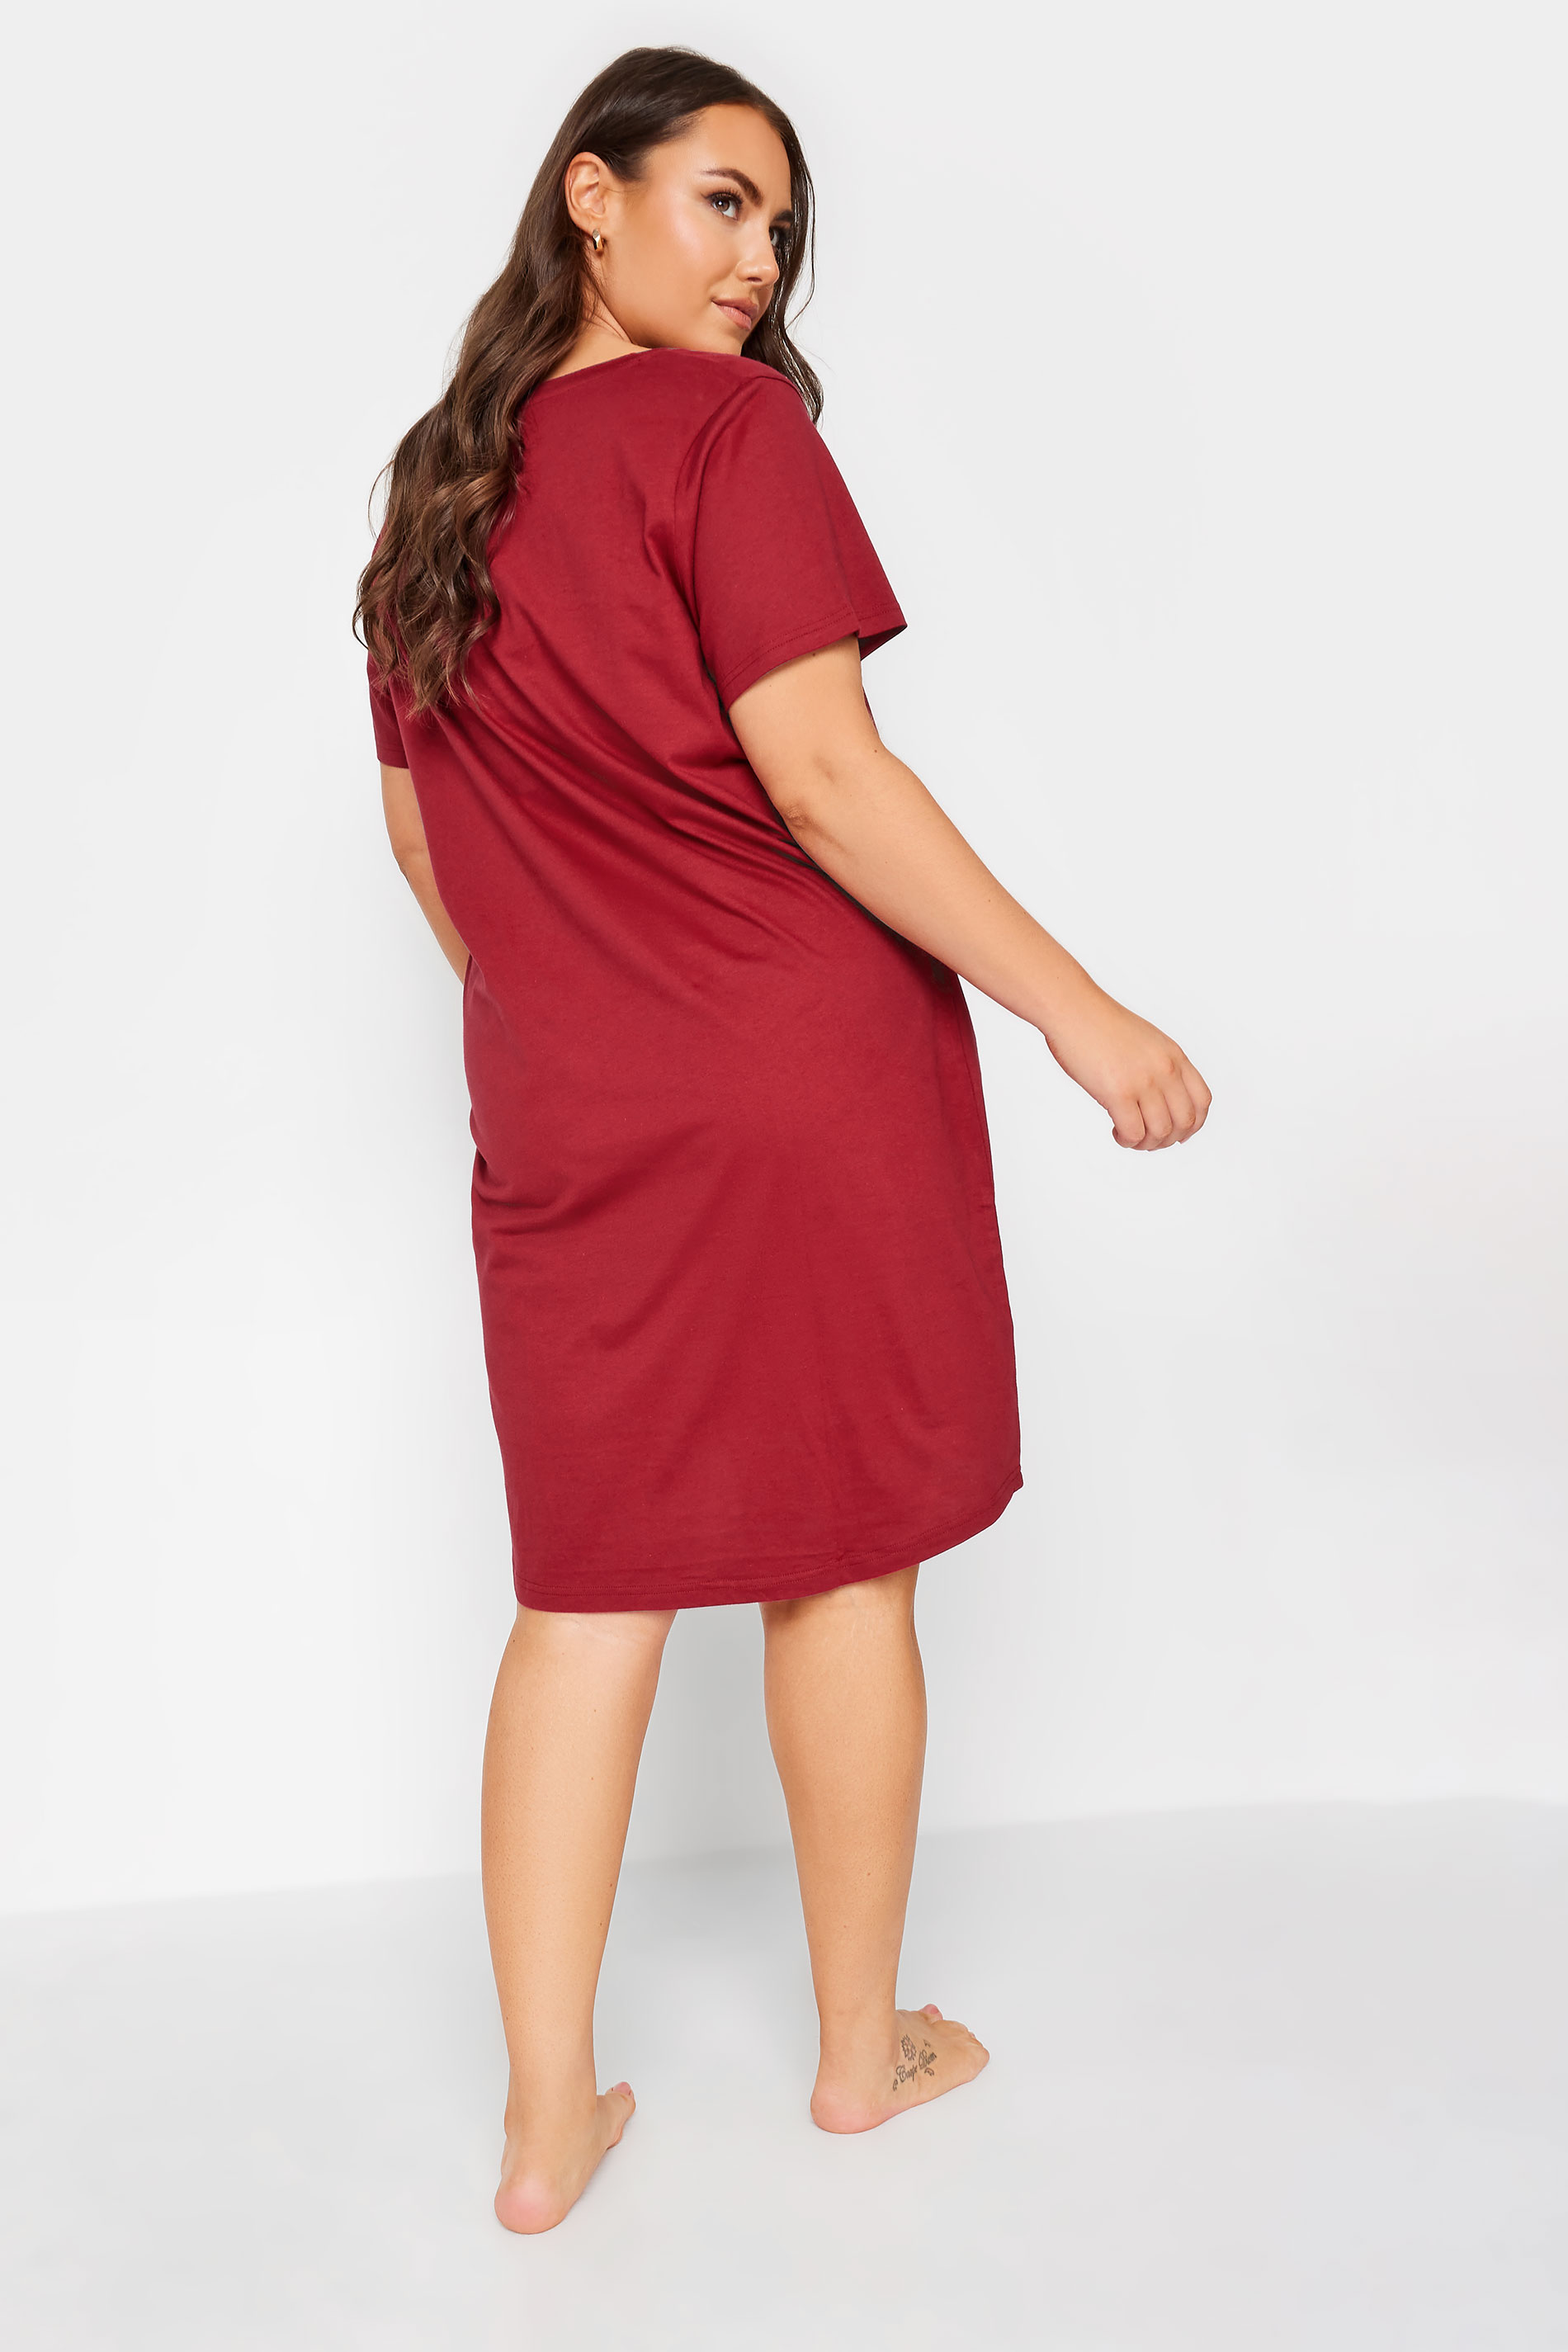 YOURS Plus Size Red Boofle ‘Warm and Cosy' Slogan Nightdress 3